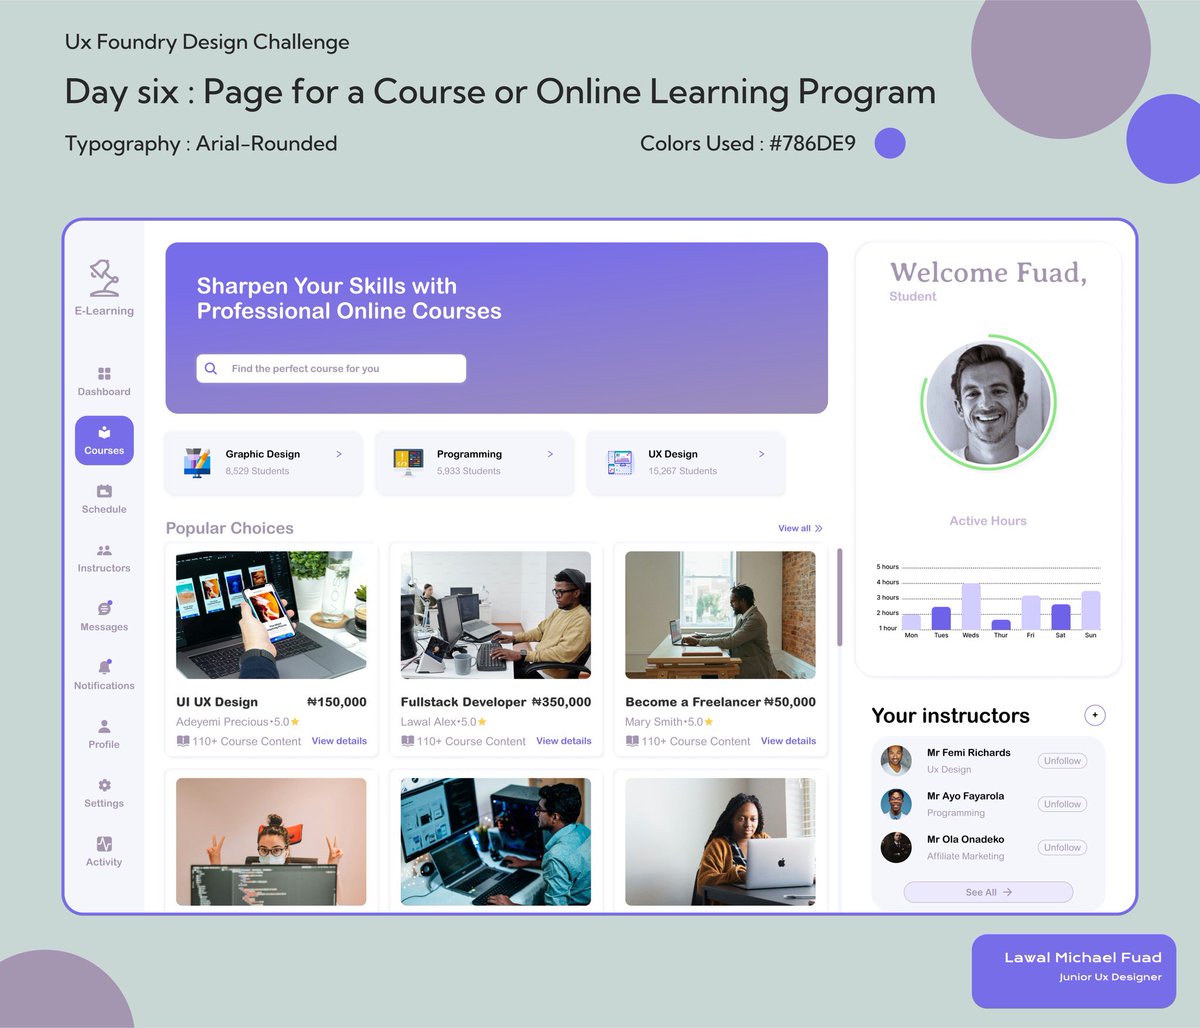 Check out my Day 6 submission for UX Foundry 30 Day Design Challenge: Courses Screen for Online Learning Platform.

Have a great weekend guys.

I am open to UX Design opportunities

#UXFoundry #CoursePage #OnlineLearning #UserExperience #UxDesign #DesignChallenge #Figma #WebUi